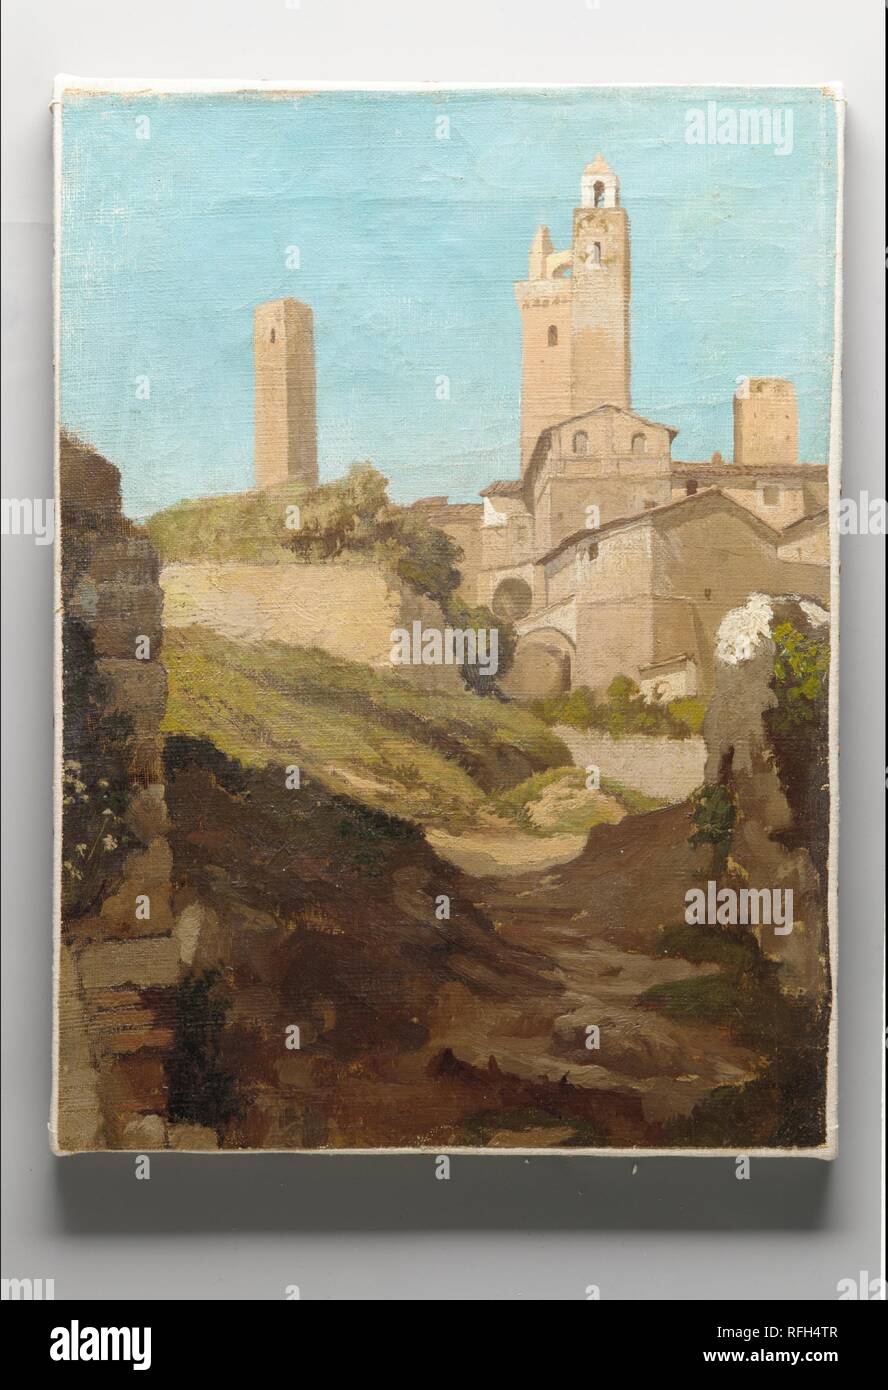 San Gimignano. Artist: Elihu Vedder (American, New York 1836-1923 Rome). Dimensions: 13 7/8 x 10 3/4 in. (35.2 x 27.3 cm).  While studying in Paris in the late 1850s, Vedder became disappointed with French academicism and decided to travel to Italy to study the work of the Italian masters. In Florence, he frequented the Caffè Michelangelo, where he met a group of young, predominantly Tuscan painters known as the Macchiaioli, who eschewed the formalism of the Accademia in favor of a more spontaneous, plein-air style inspired by nature. Vedder's view of San Gimignano, a picturesque medieval hill Stock Photo